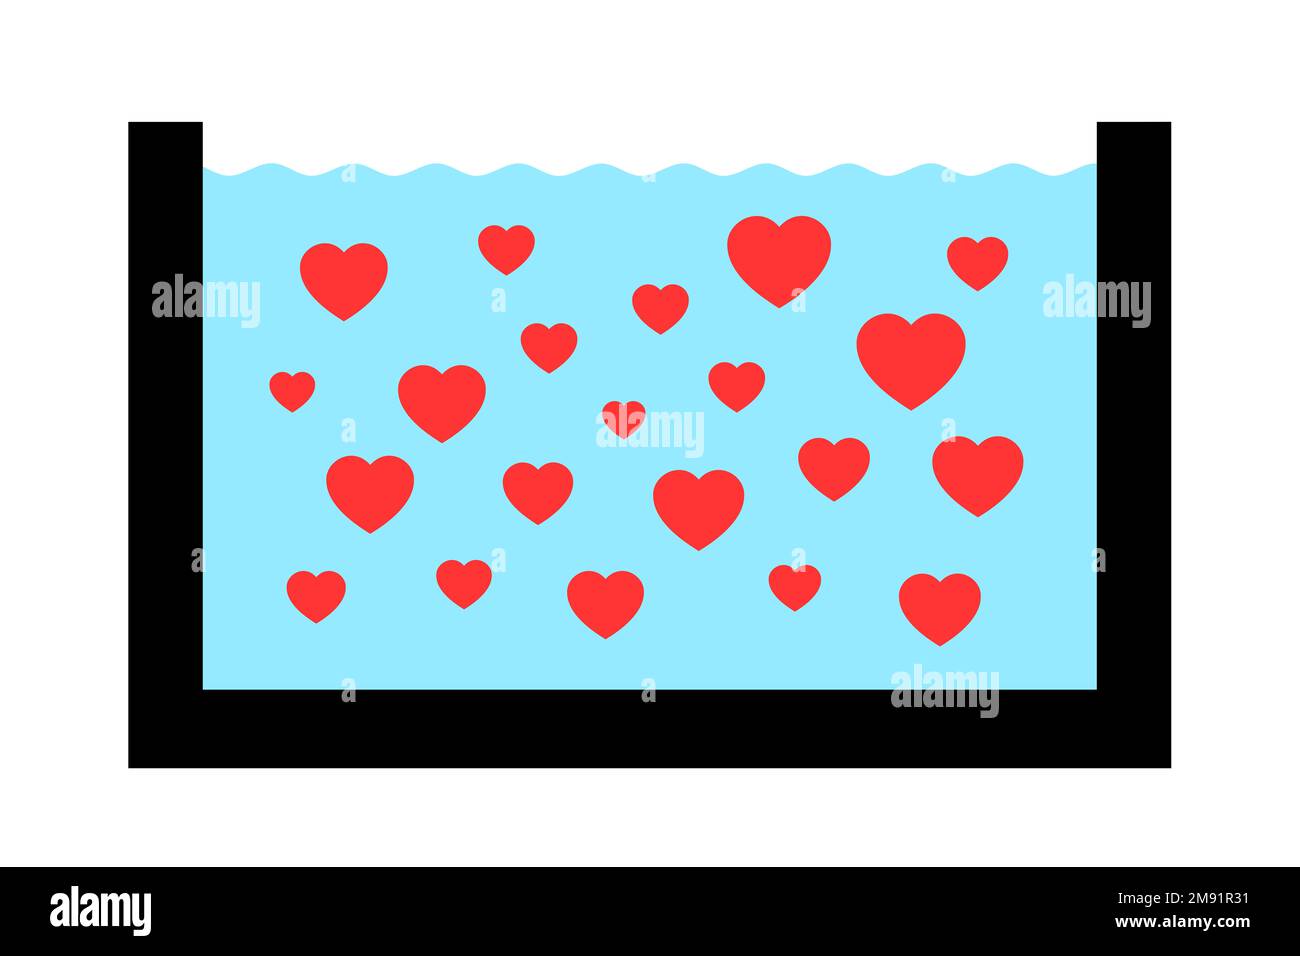 Dating pool - space of potential matching partners for sexual, intimate, romantic and love relationship and partnership. Vector illustration isolated Stock Photo